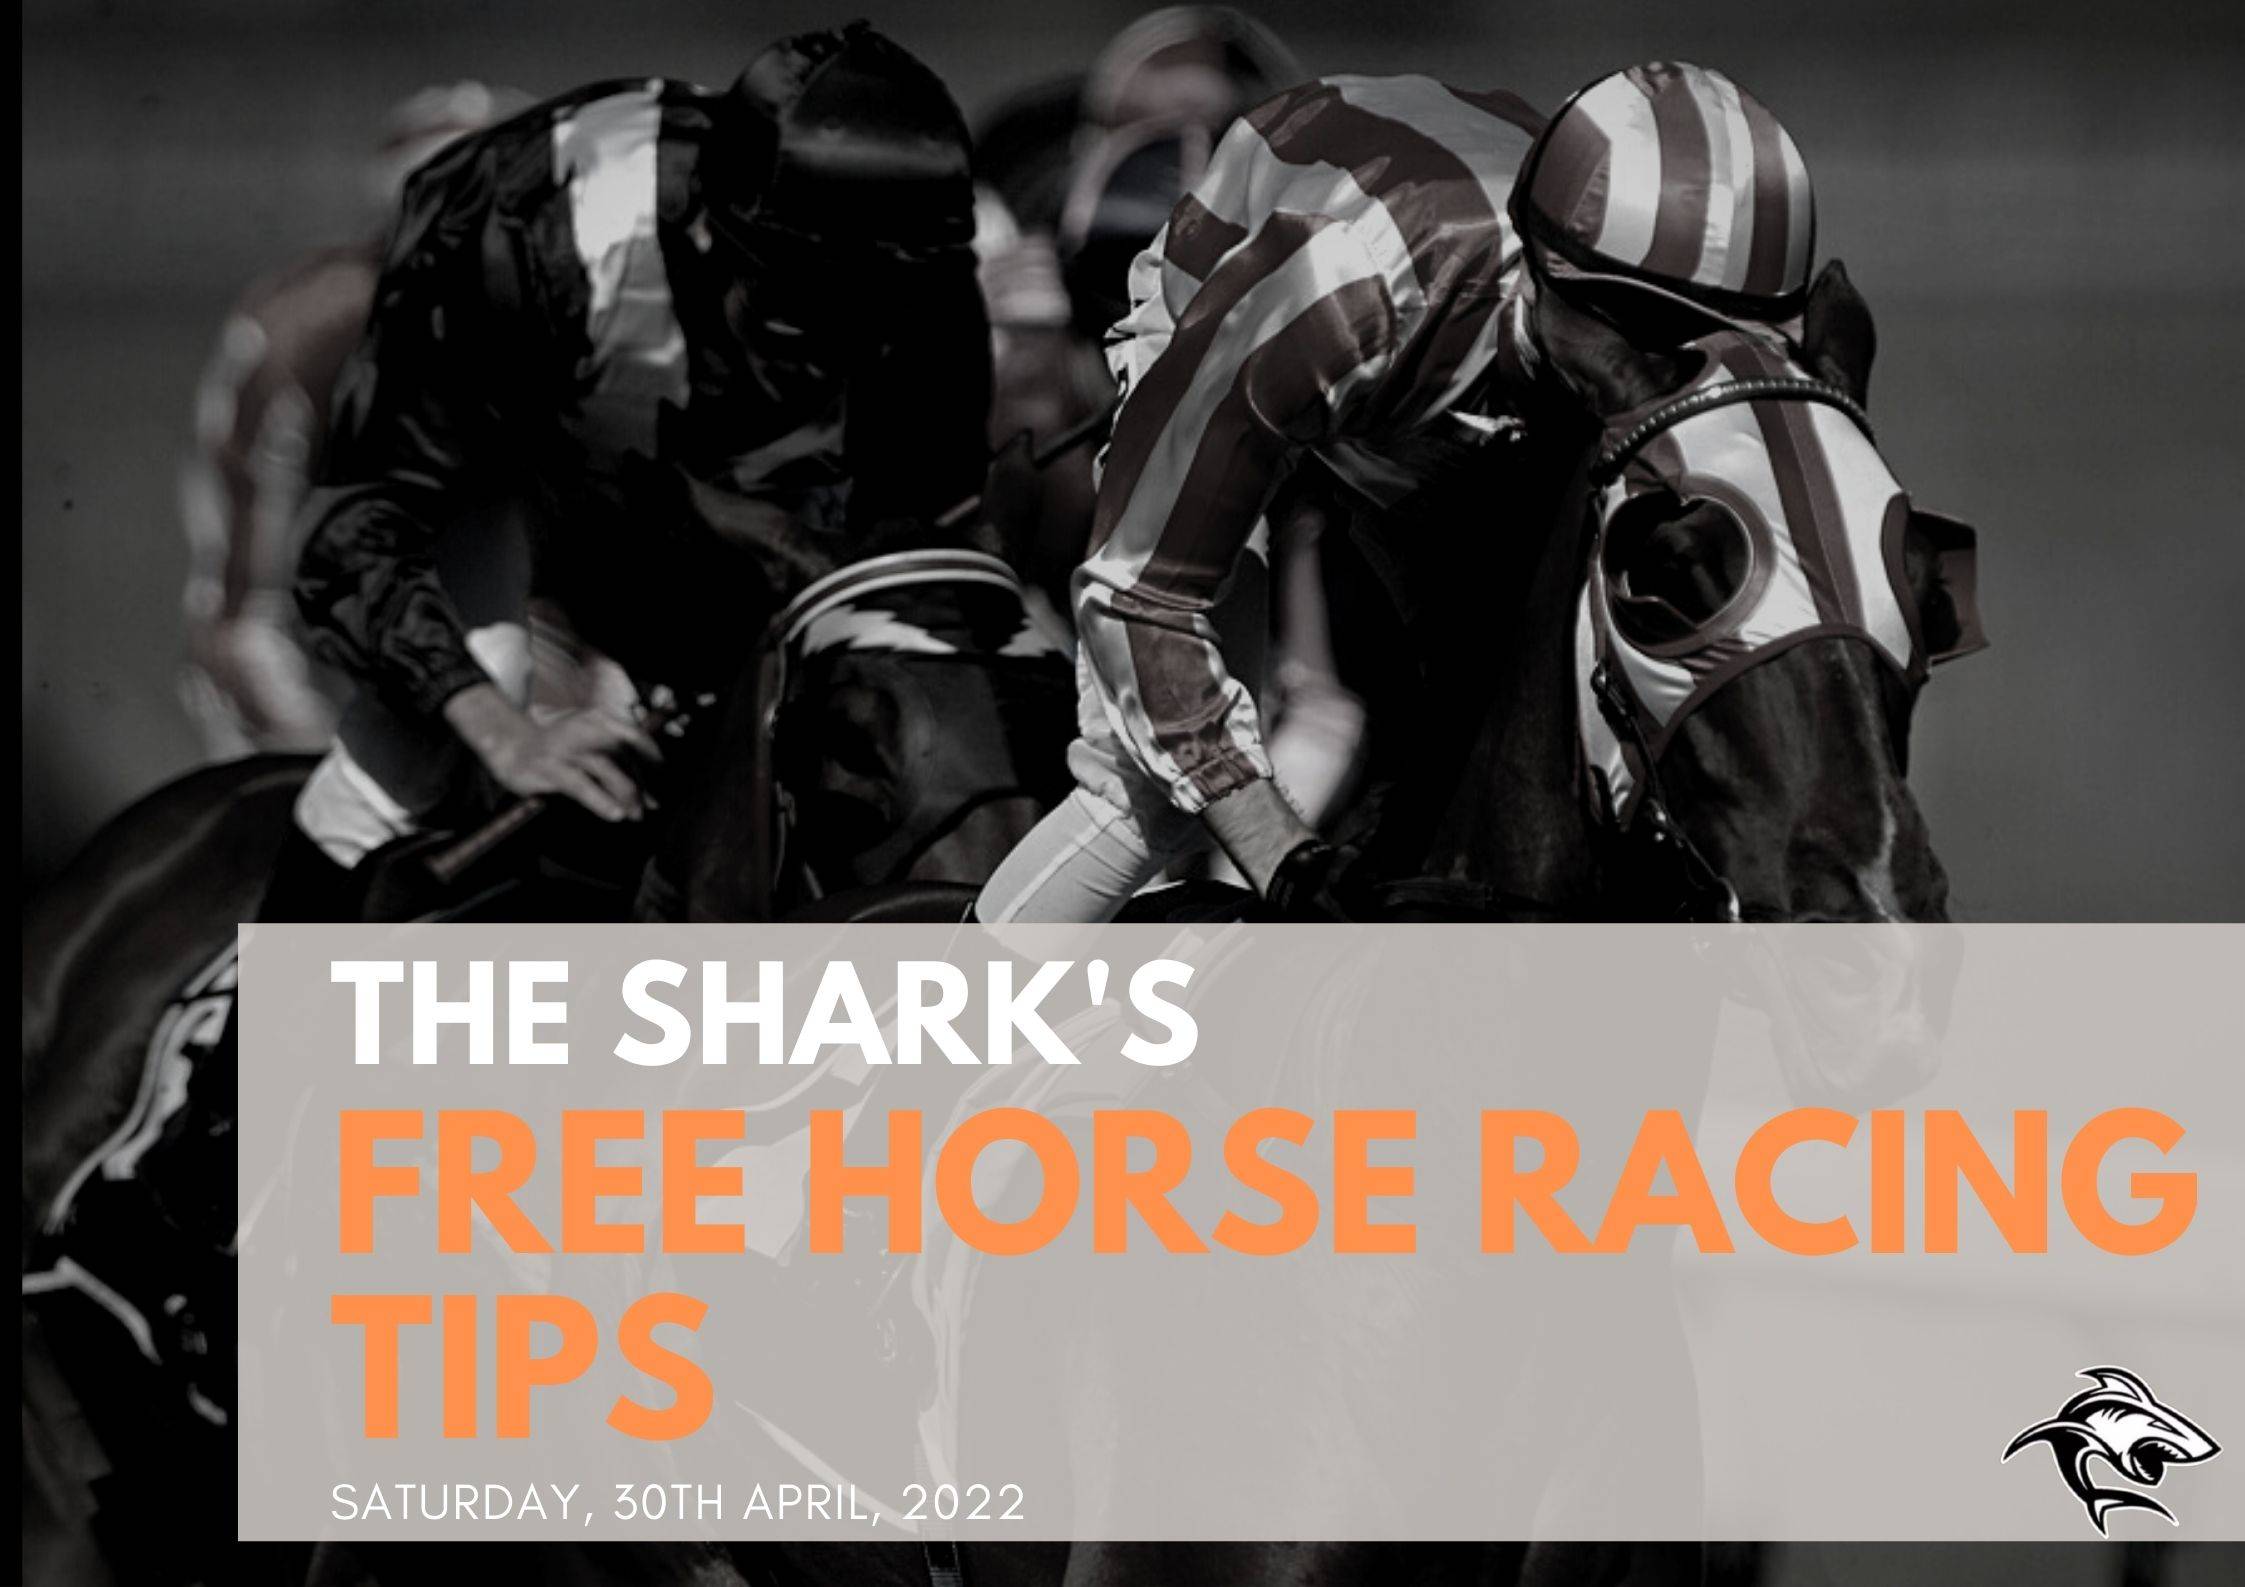 Free Horse Racing Tips - 30th Apr